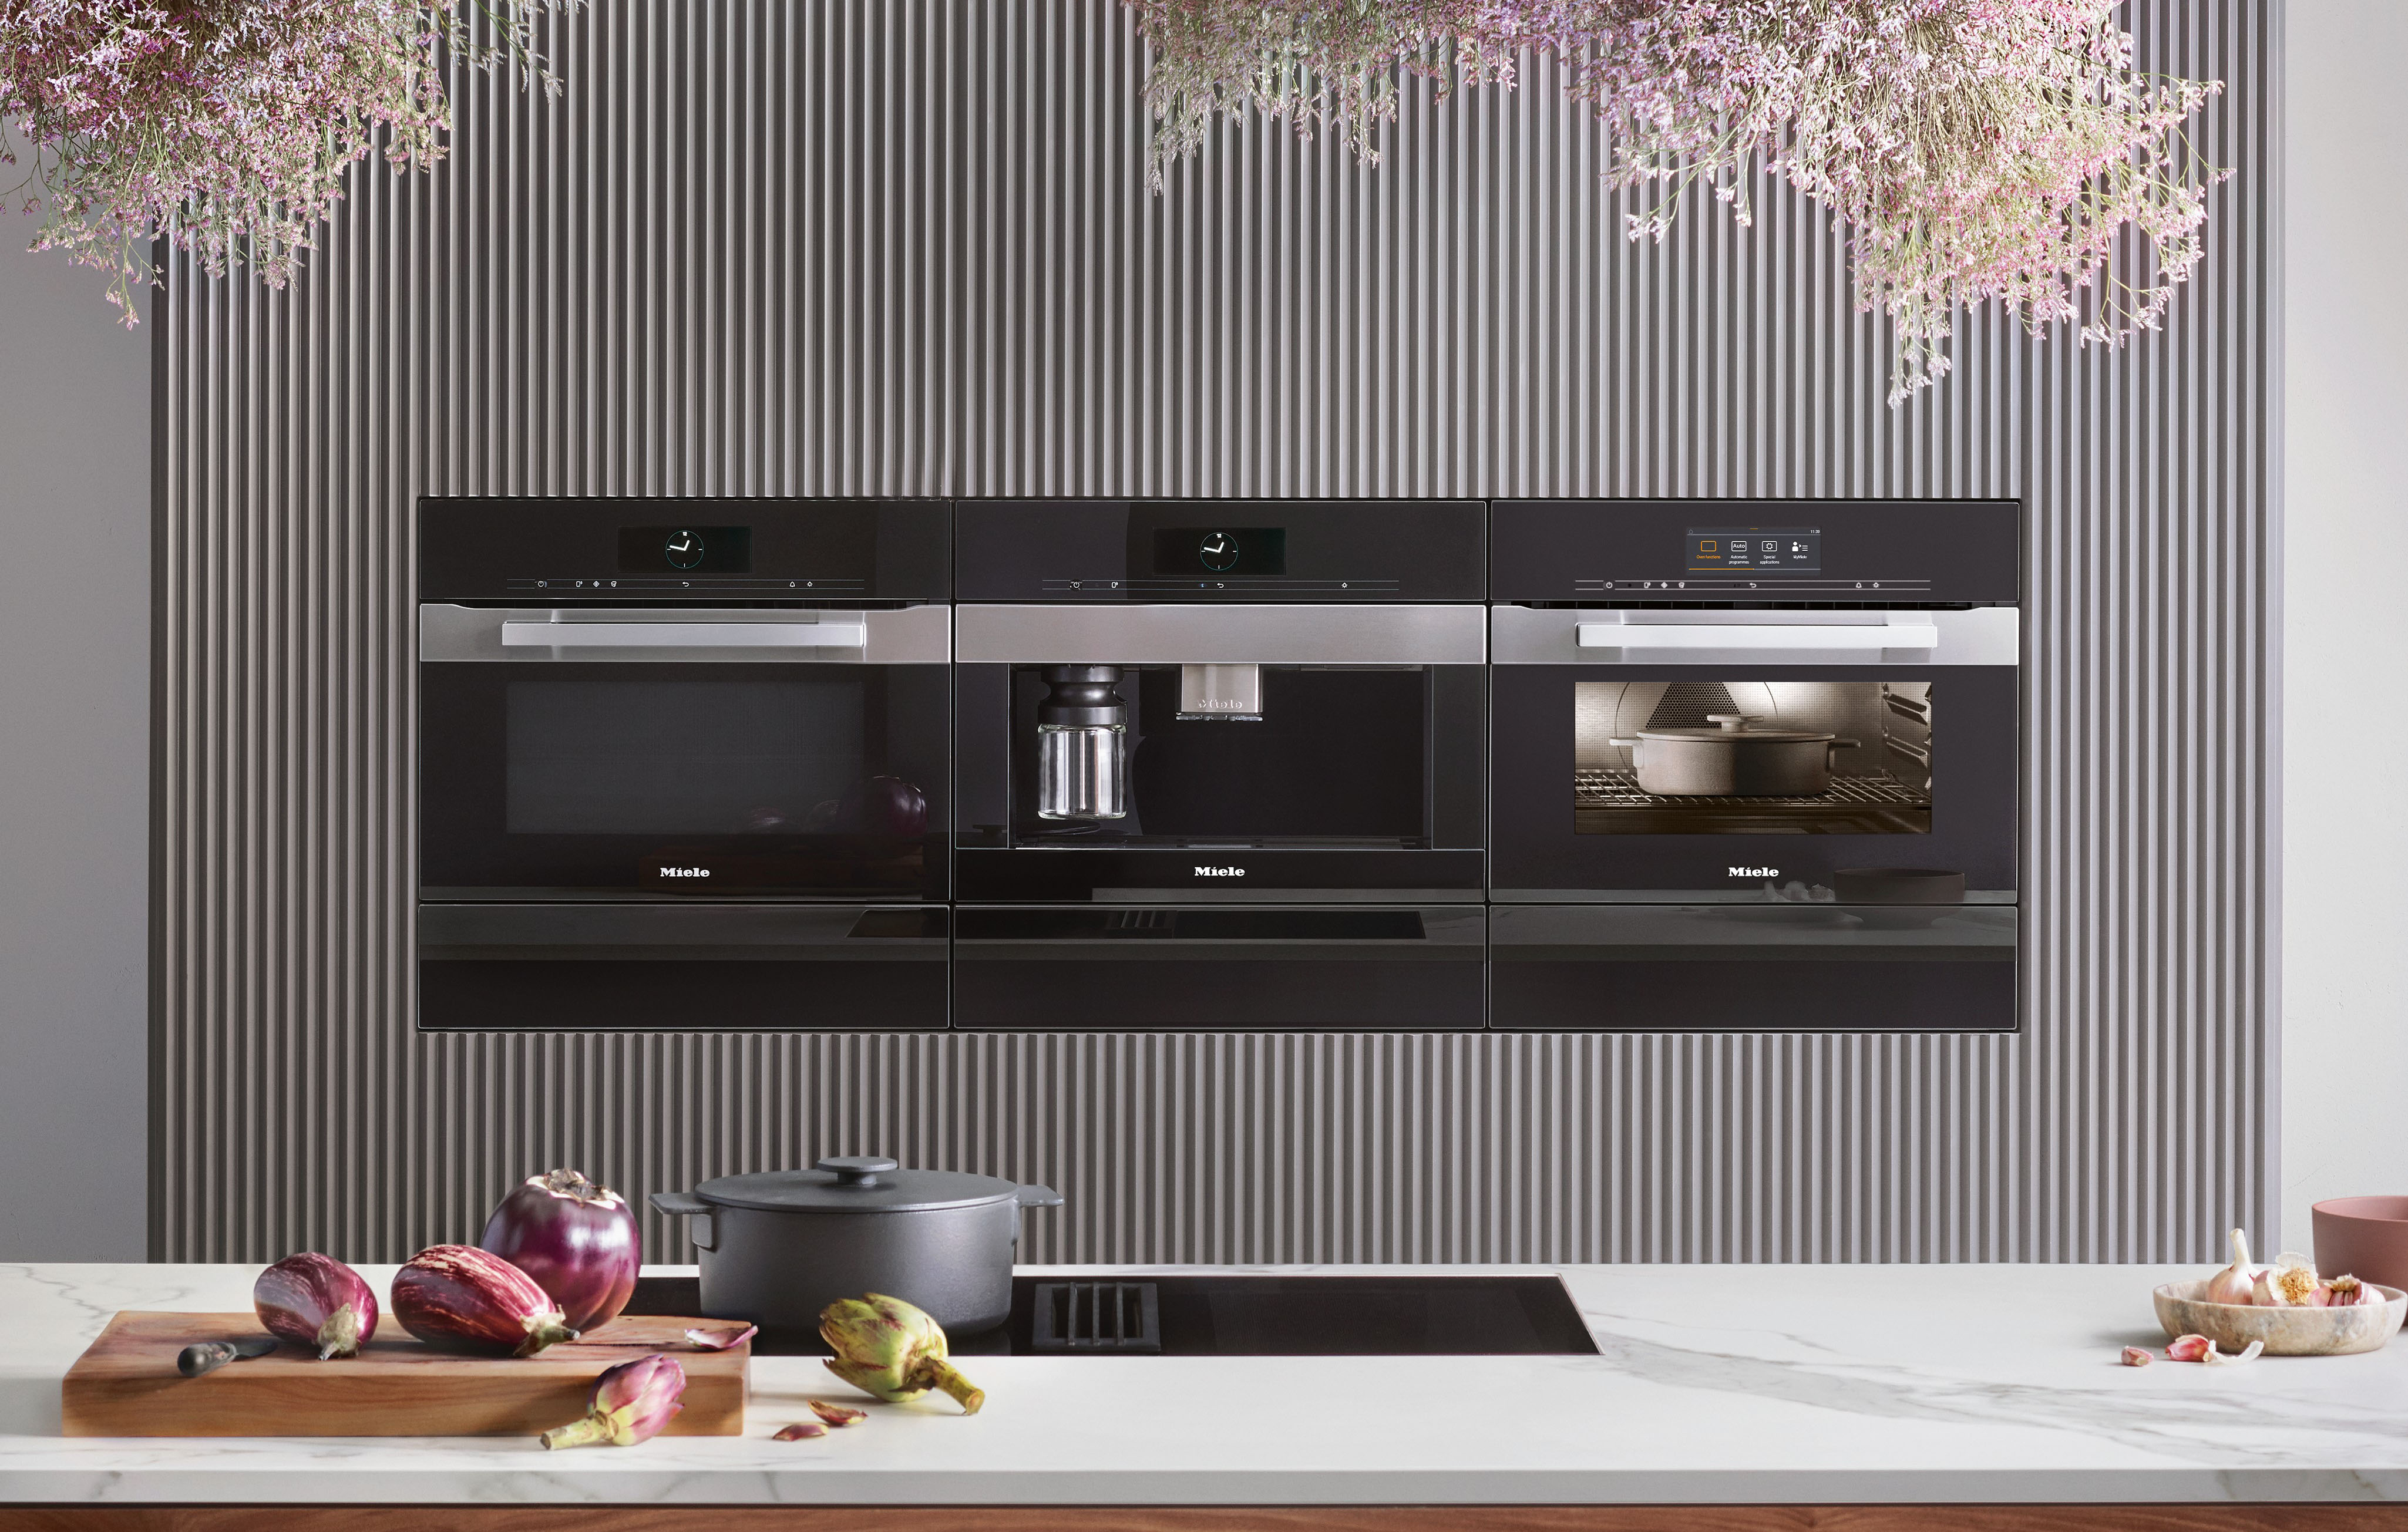 Save Up To 10% On Miele Kitchen Appliance Packages* at Hart & Co